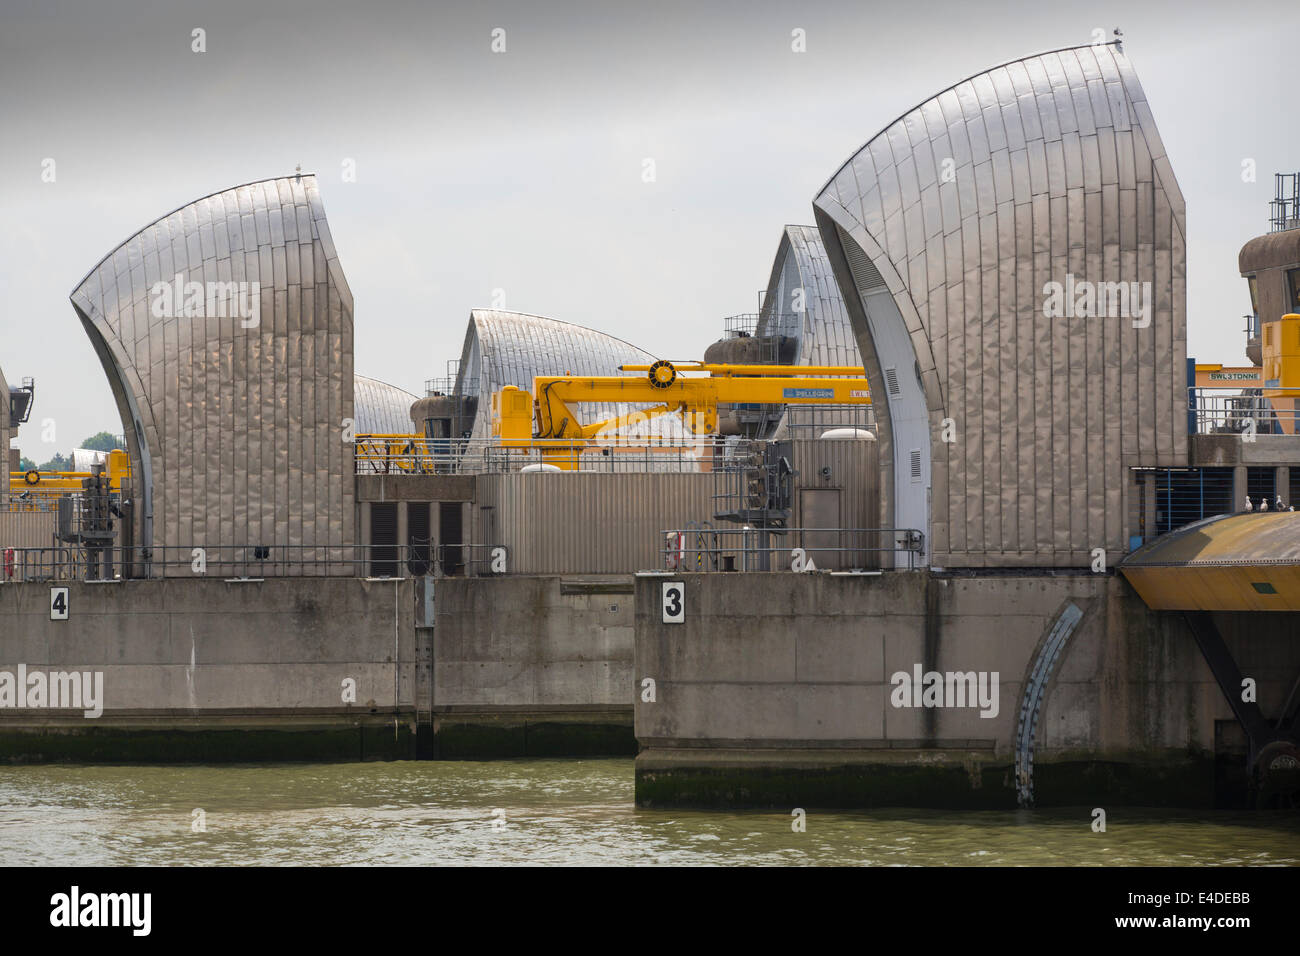 The Thames barrier on the River Thames in London. It was constructed to protect the capital city from storm surge flooding. Recent predictions show it will probably be redundant in around twenty years due to increased stormy weather and sea level rise driven by climate change. Stock Photo